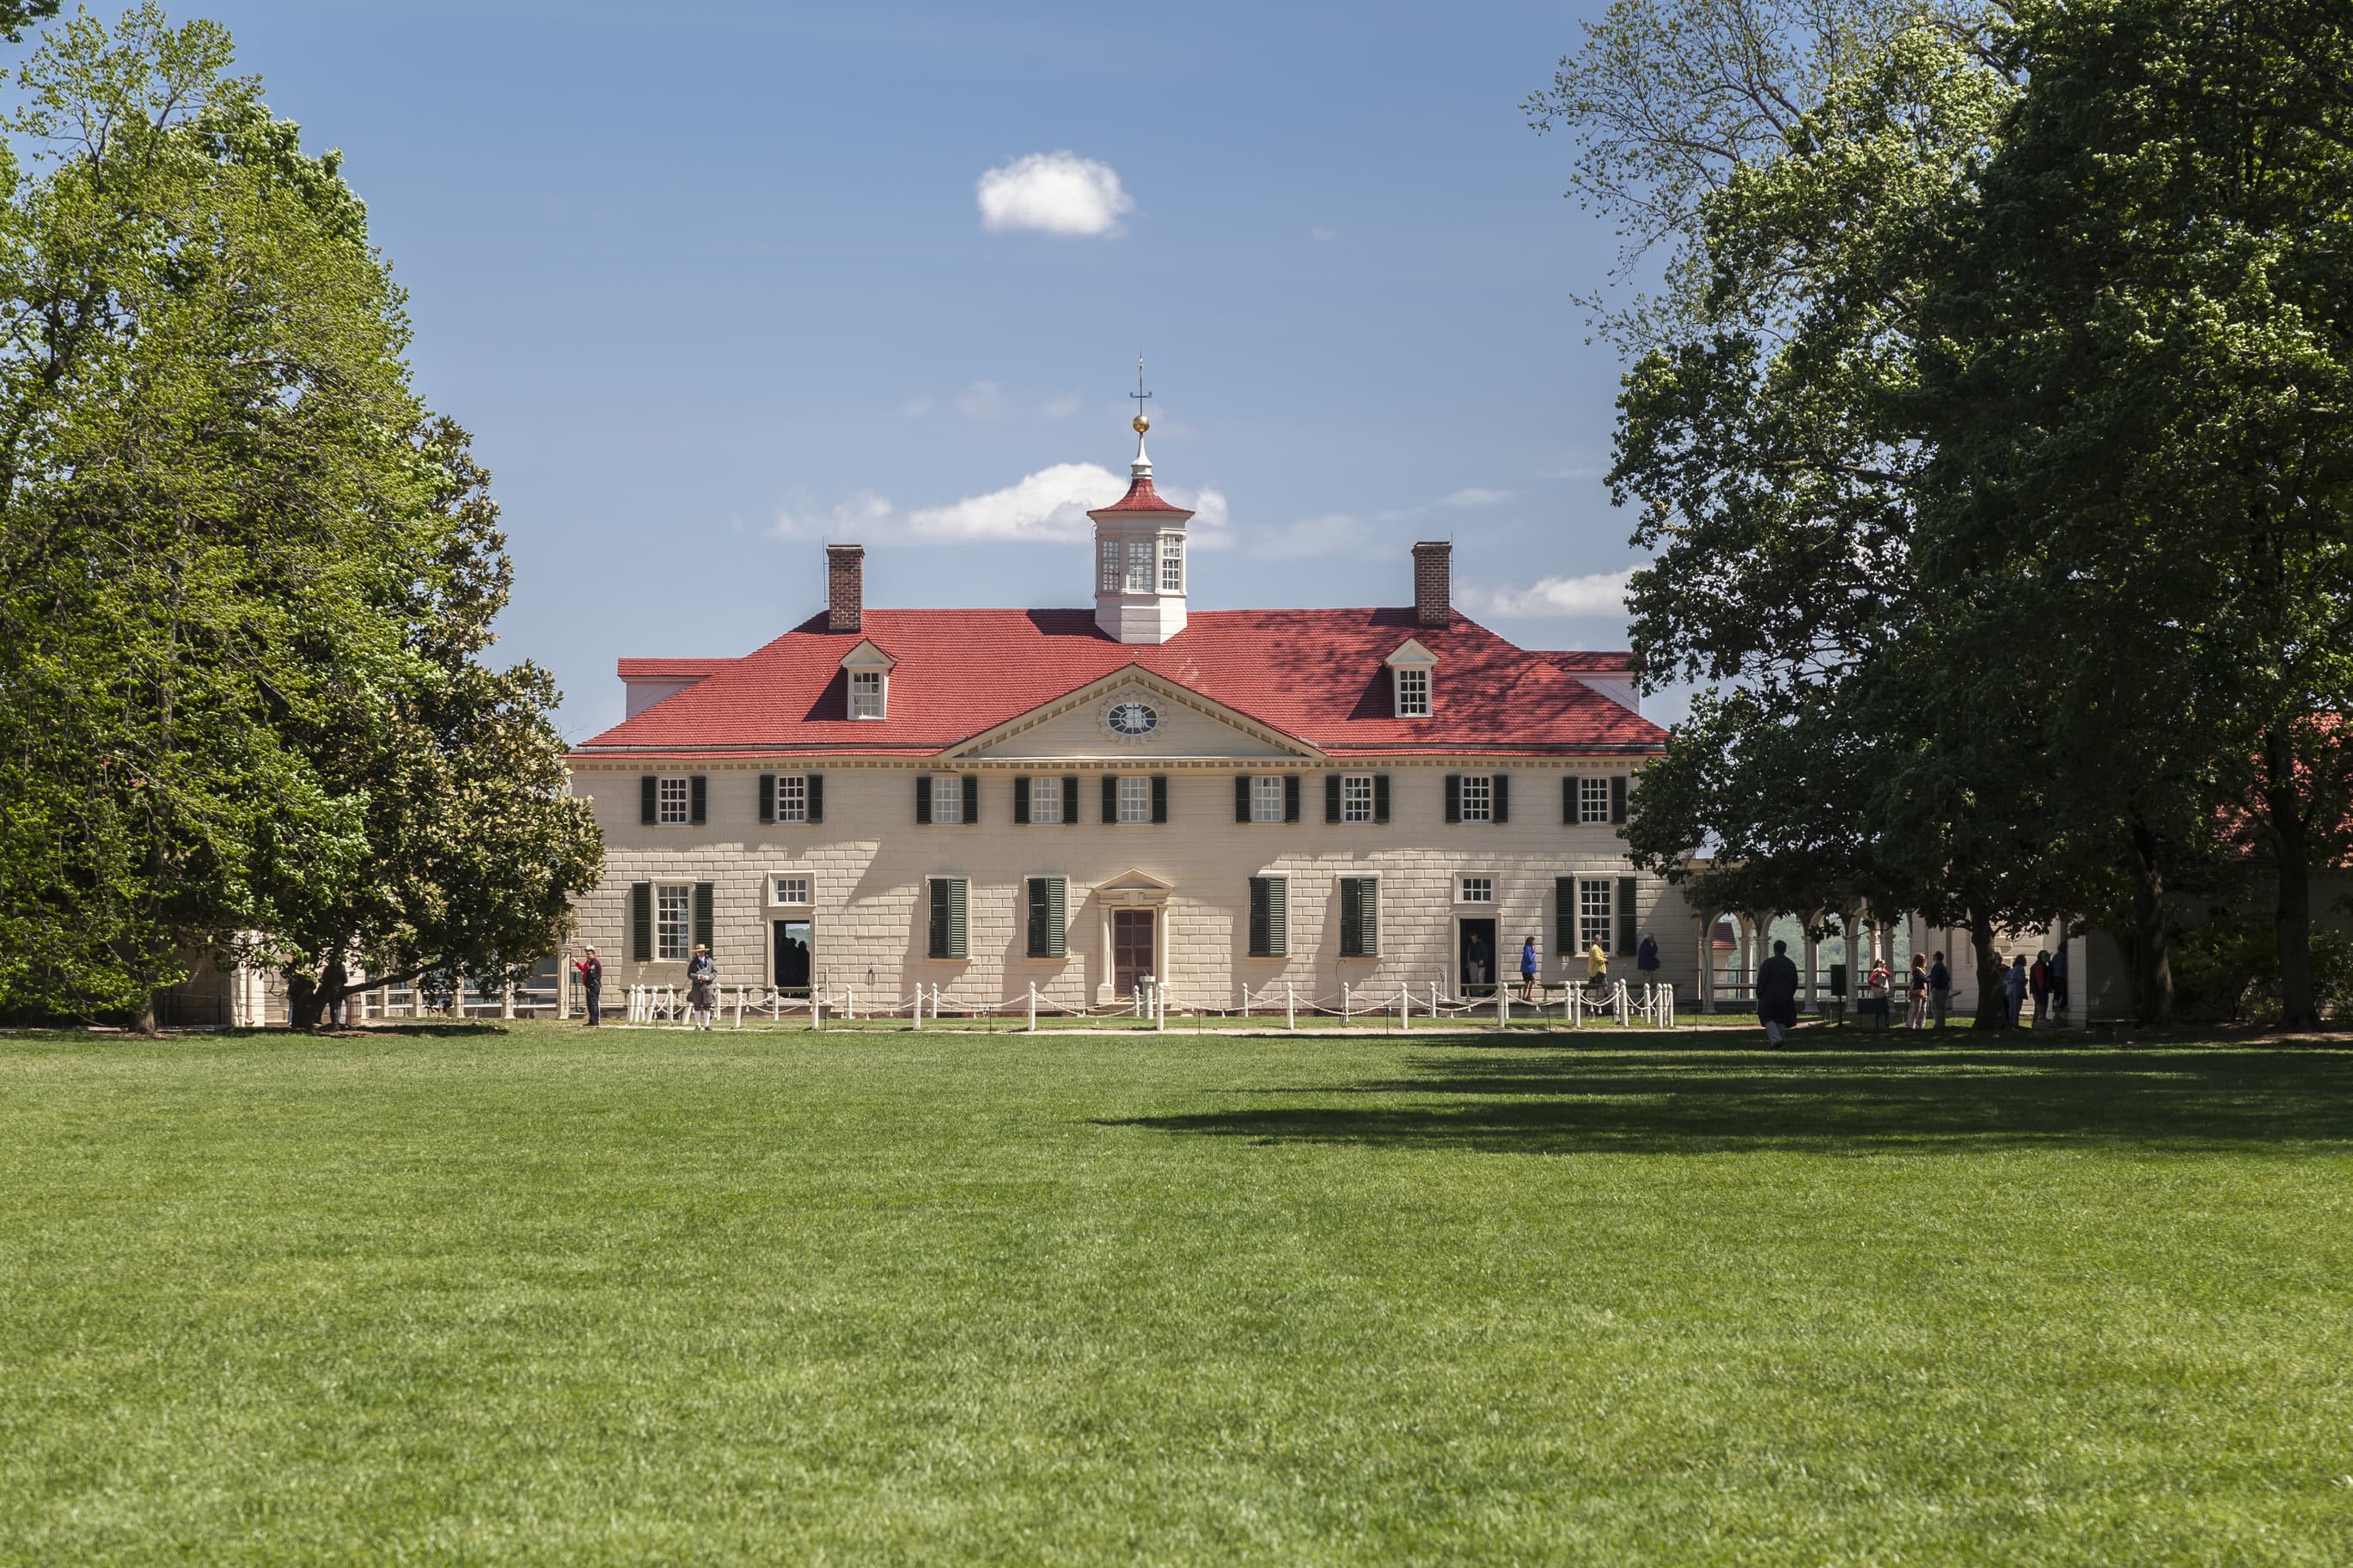 Lawn in front of Washington's mount vernon home